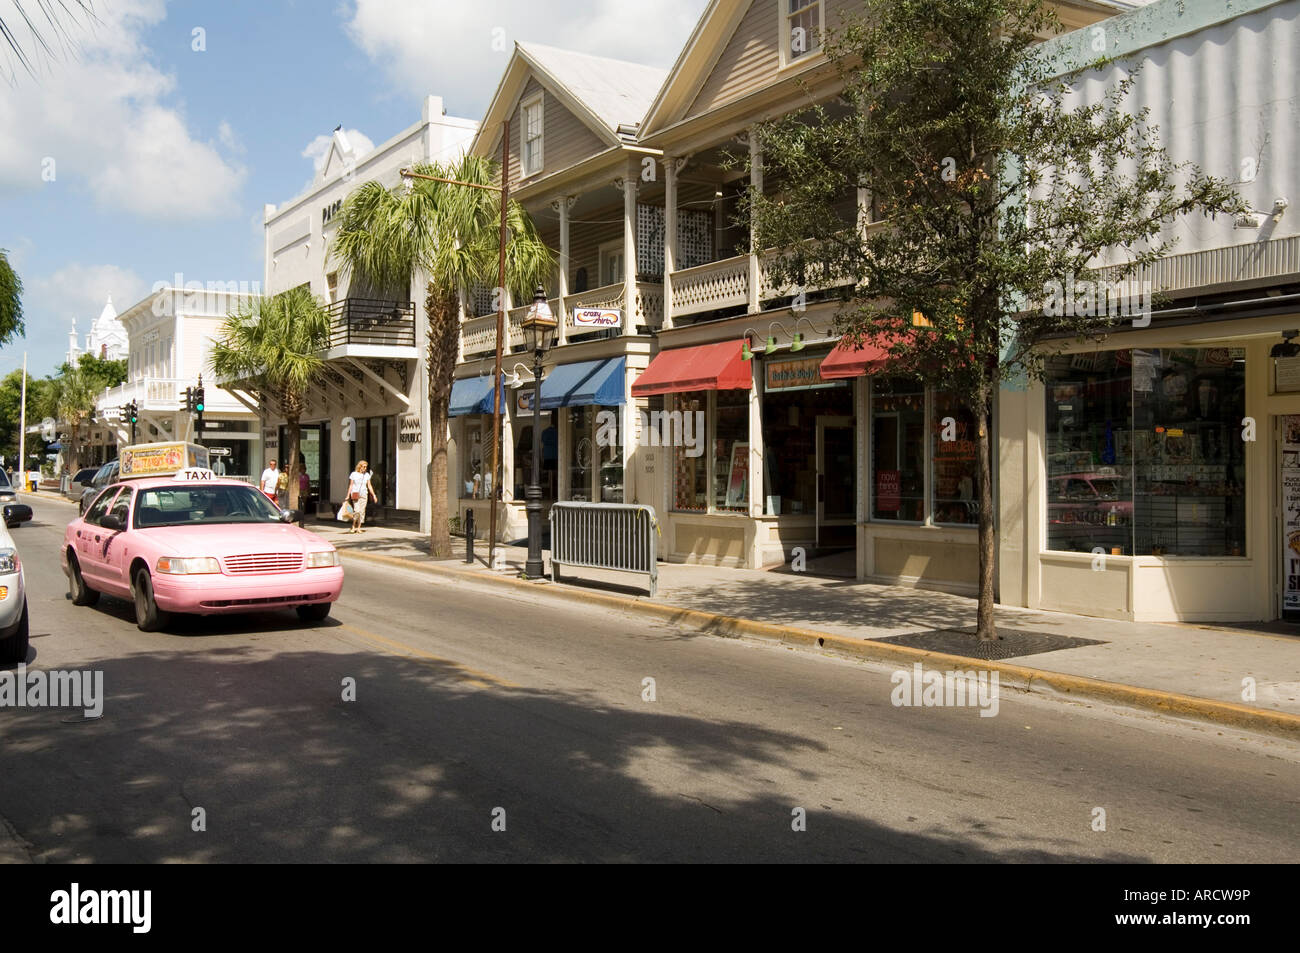 Pink taxis, Duval Street, Key West, Florida, United States of America, North America Stock Photo